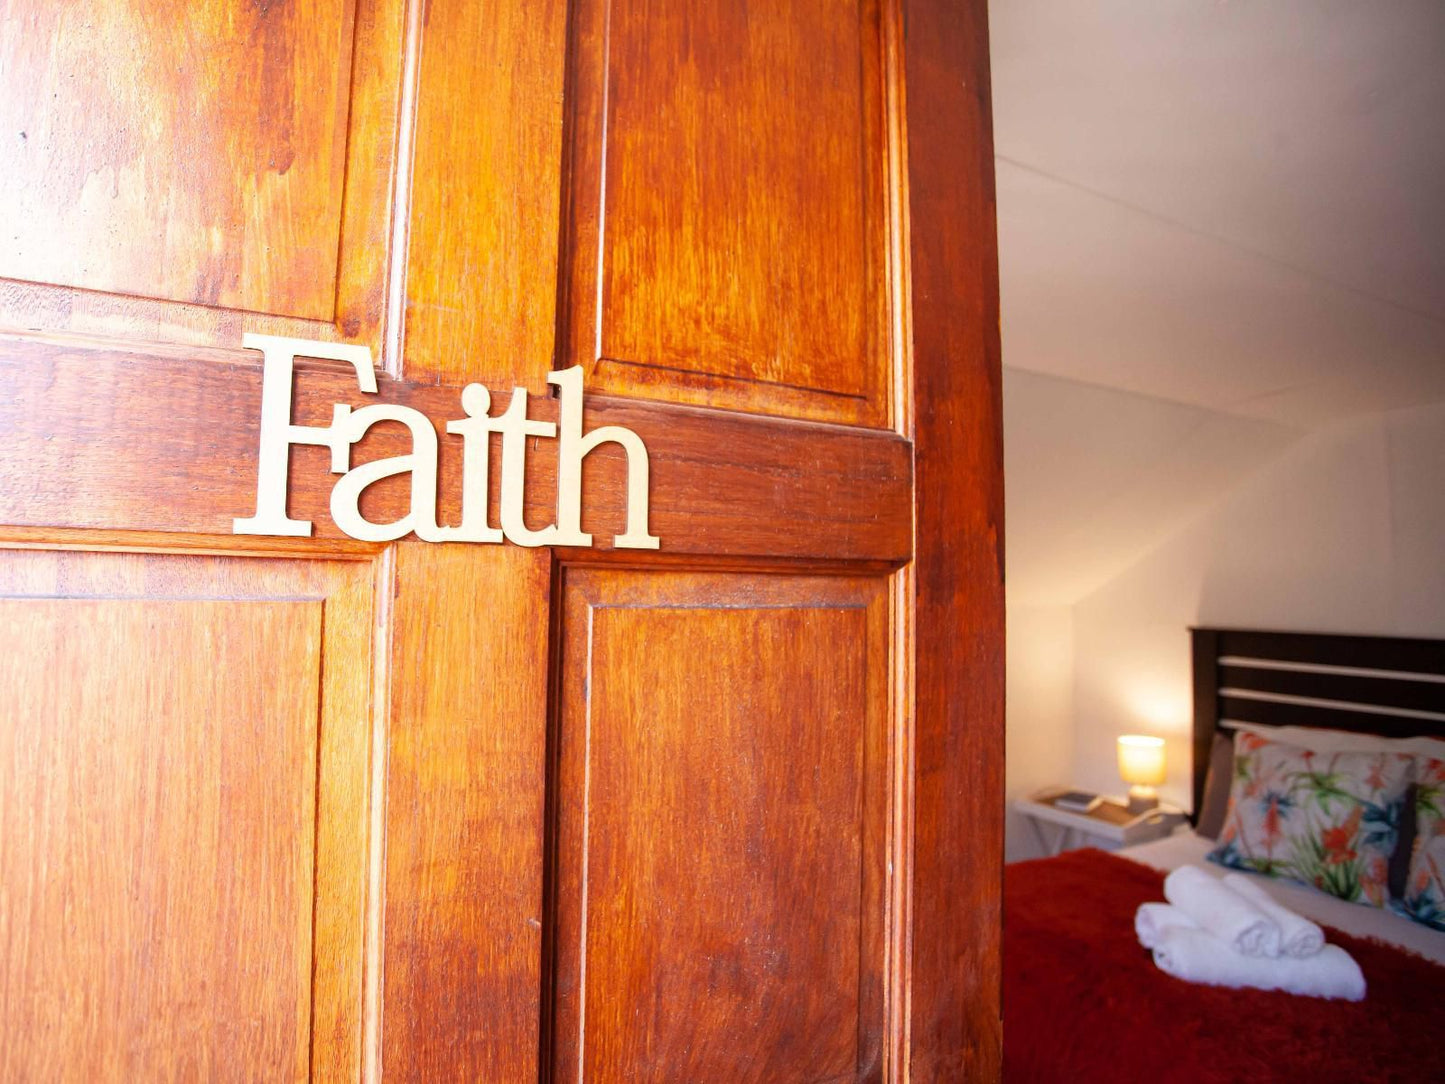 Flametree Guesthouse Swellendam Western Cape South Africa Colorful, Cross, Religion